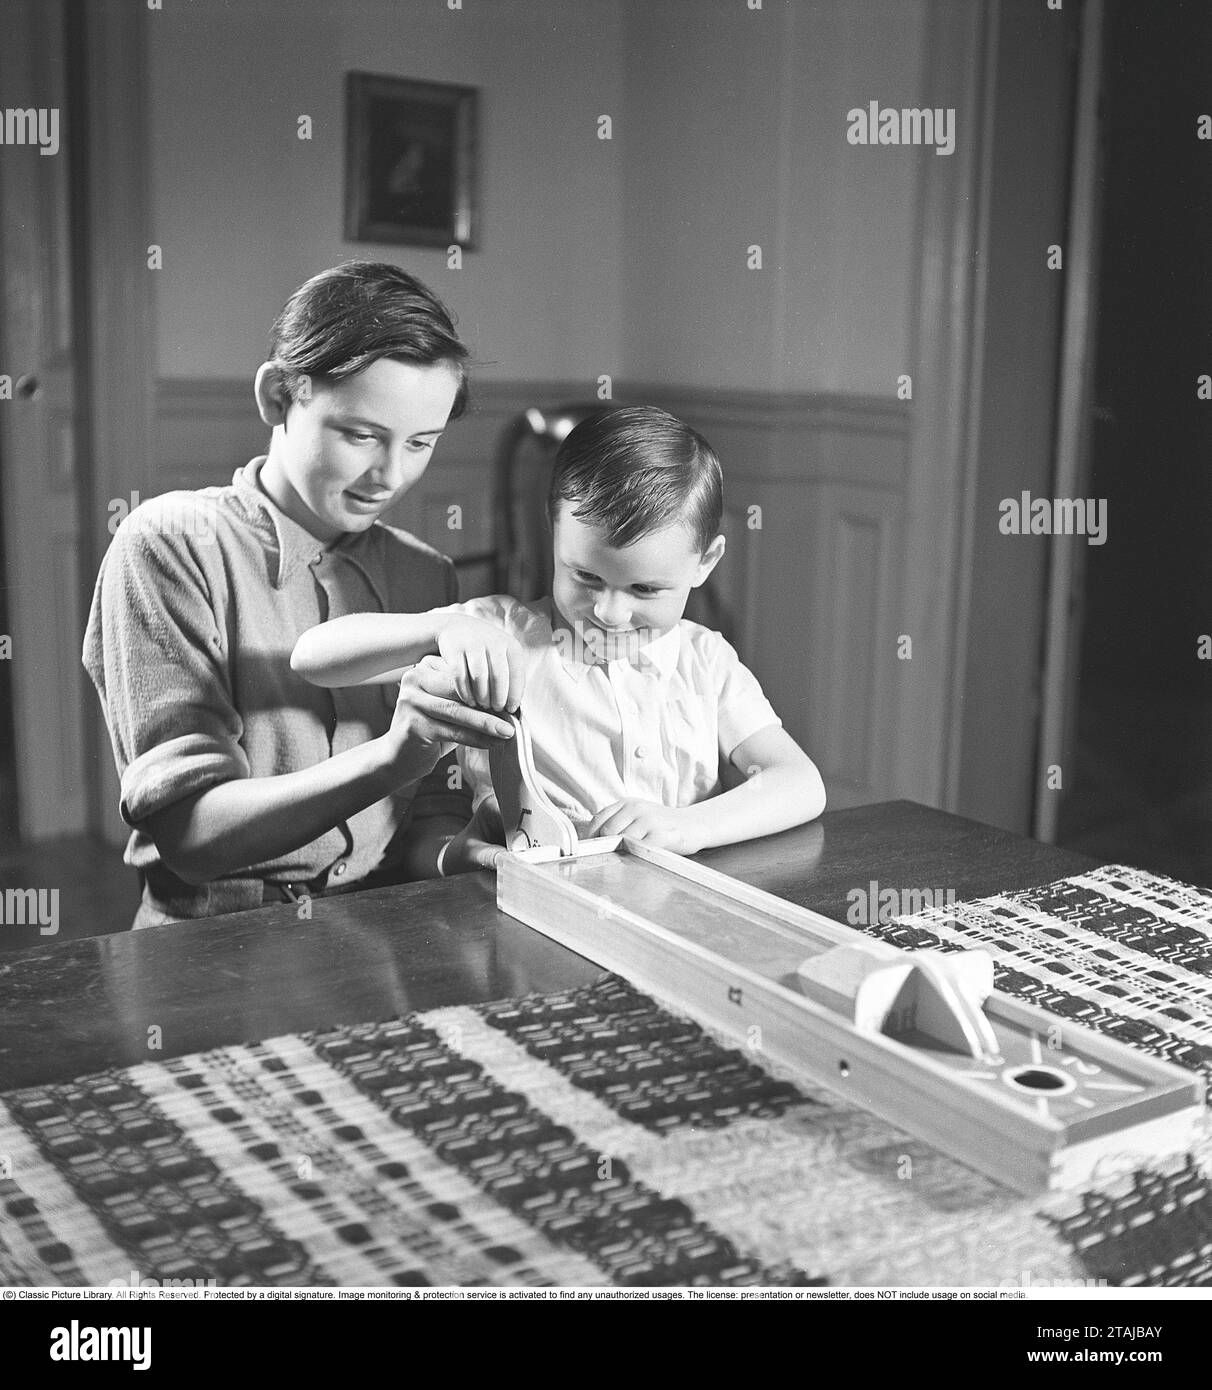 Children play games in the 1940s. In the absence of television and the Internet, the children of the 1940s spent their free time, among other things. with playing board games. Here, two boys playing a game where the aim is to get a coin right along a wooden track. It is dropped and rolls along a track and the goal is to get the coin to stop on a part of the track that gives the highest score. 1949. Kristoffersson ref AU62-5 Stock Photo